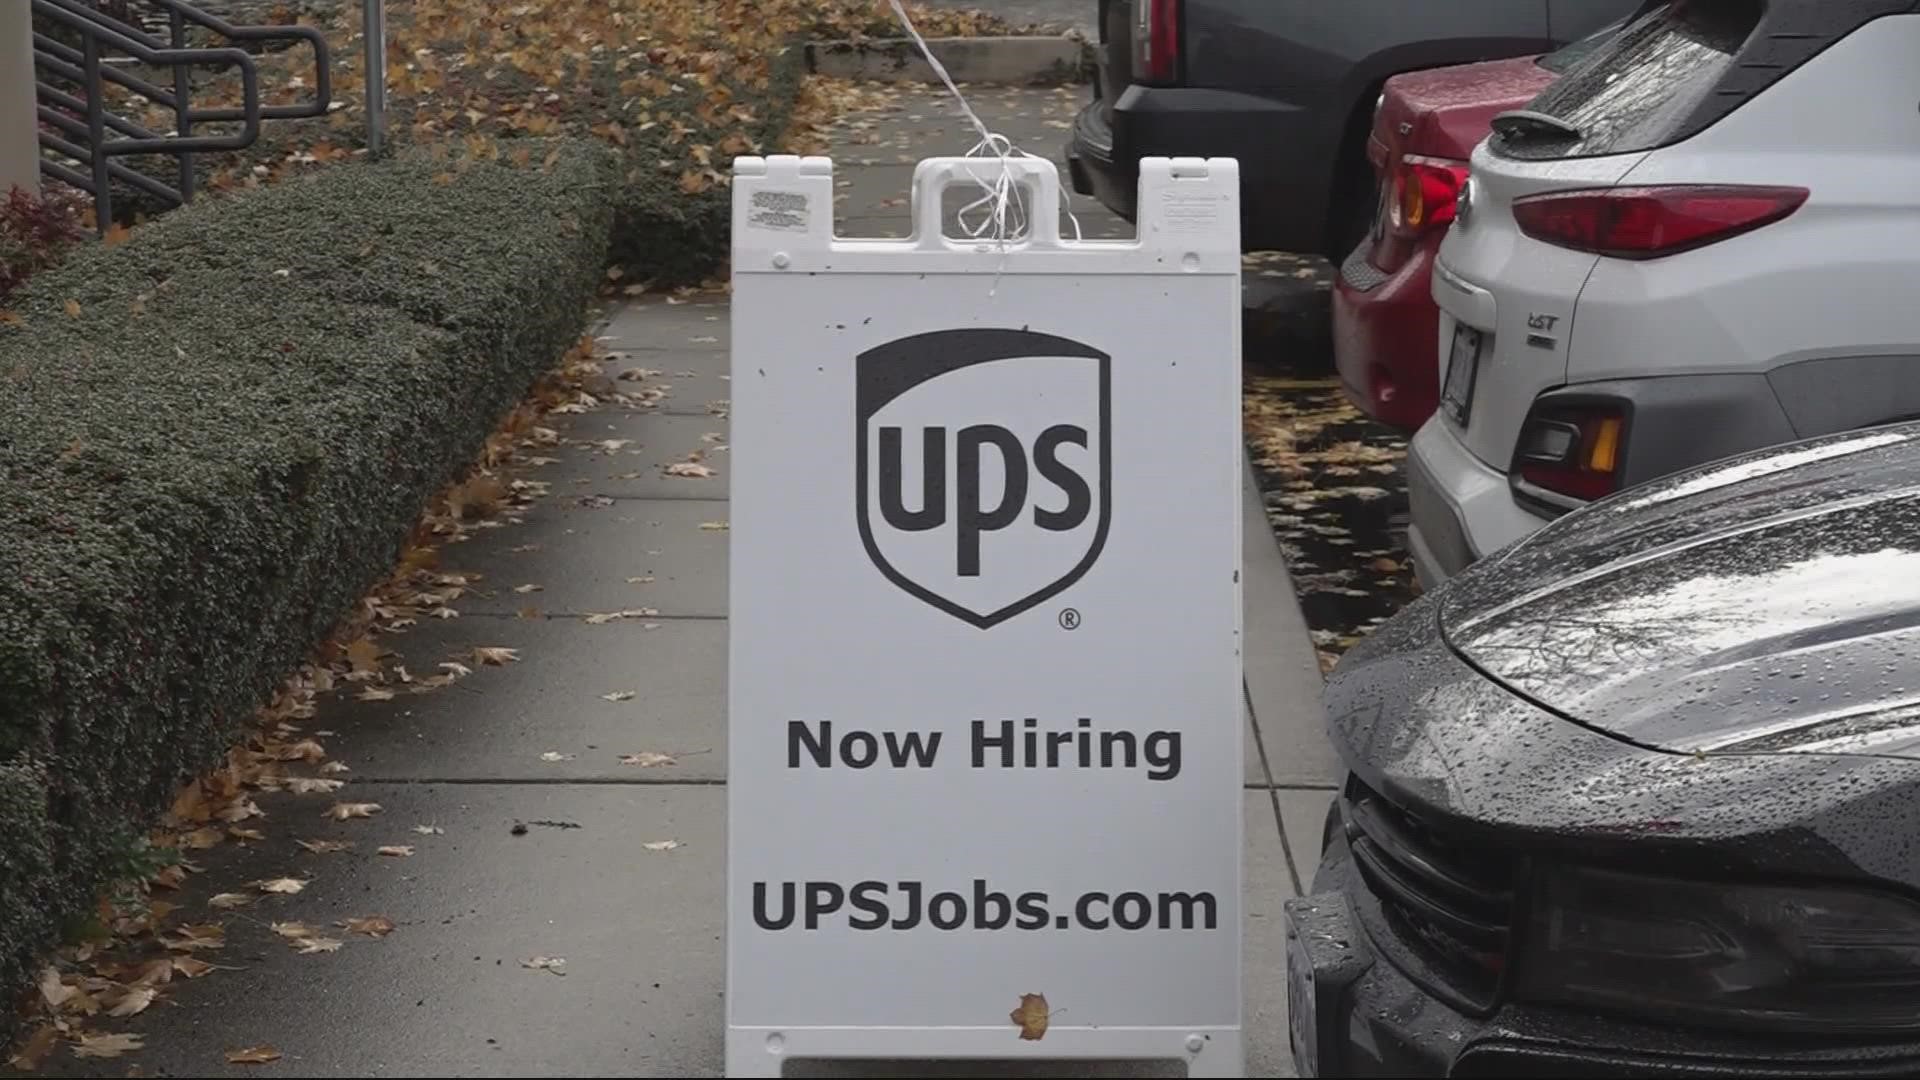 Businesses like UPS that rely on seasonal workers are offering perks like bonuses and college tuition money to staff up during the busy holiday season.